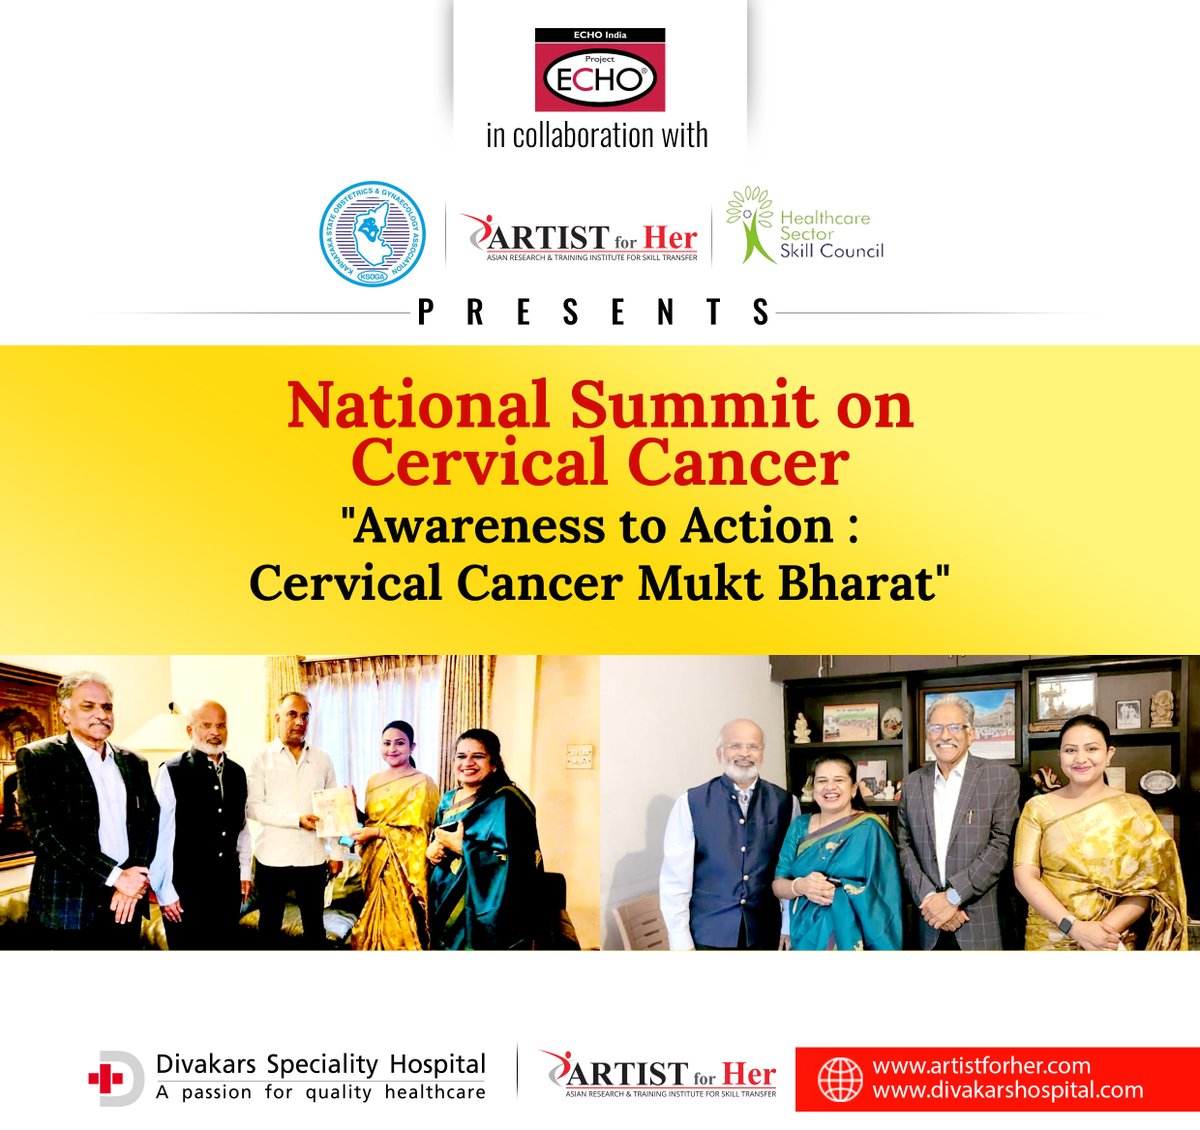 Cervical cancer ranks as the 4th most common cancer among women worldwide. To address this pressing challenge, we're hosting a National Summit on Cervical Cancer: 'Awareness to Action; Cervical Cancer Mukt Bharat' on Mar 9, 2024 in Bengaluru @ECHOIndiaTrust @ahpi_india